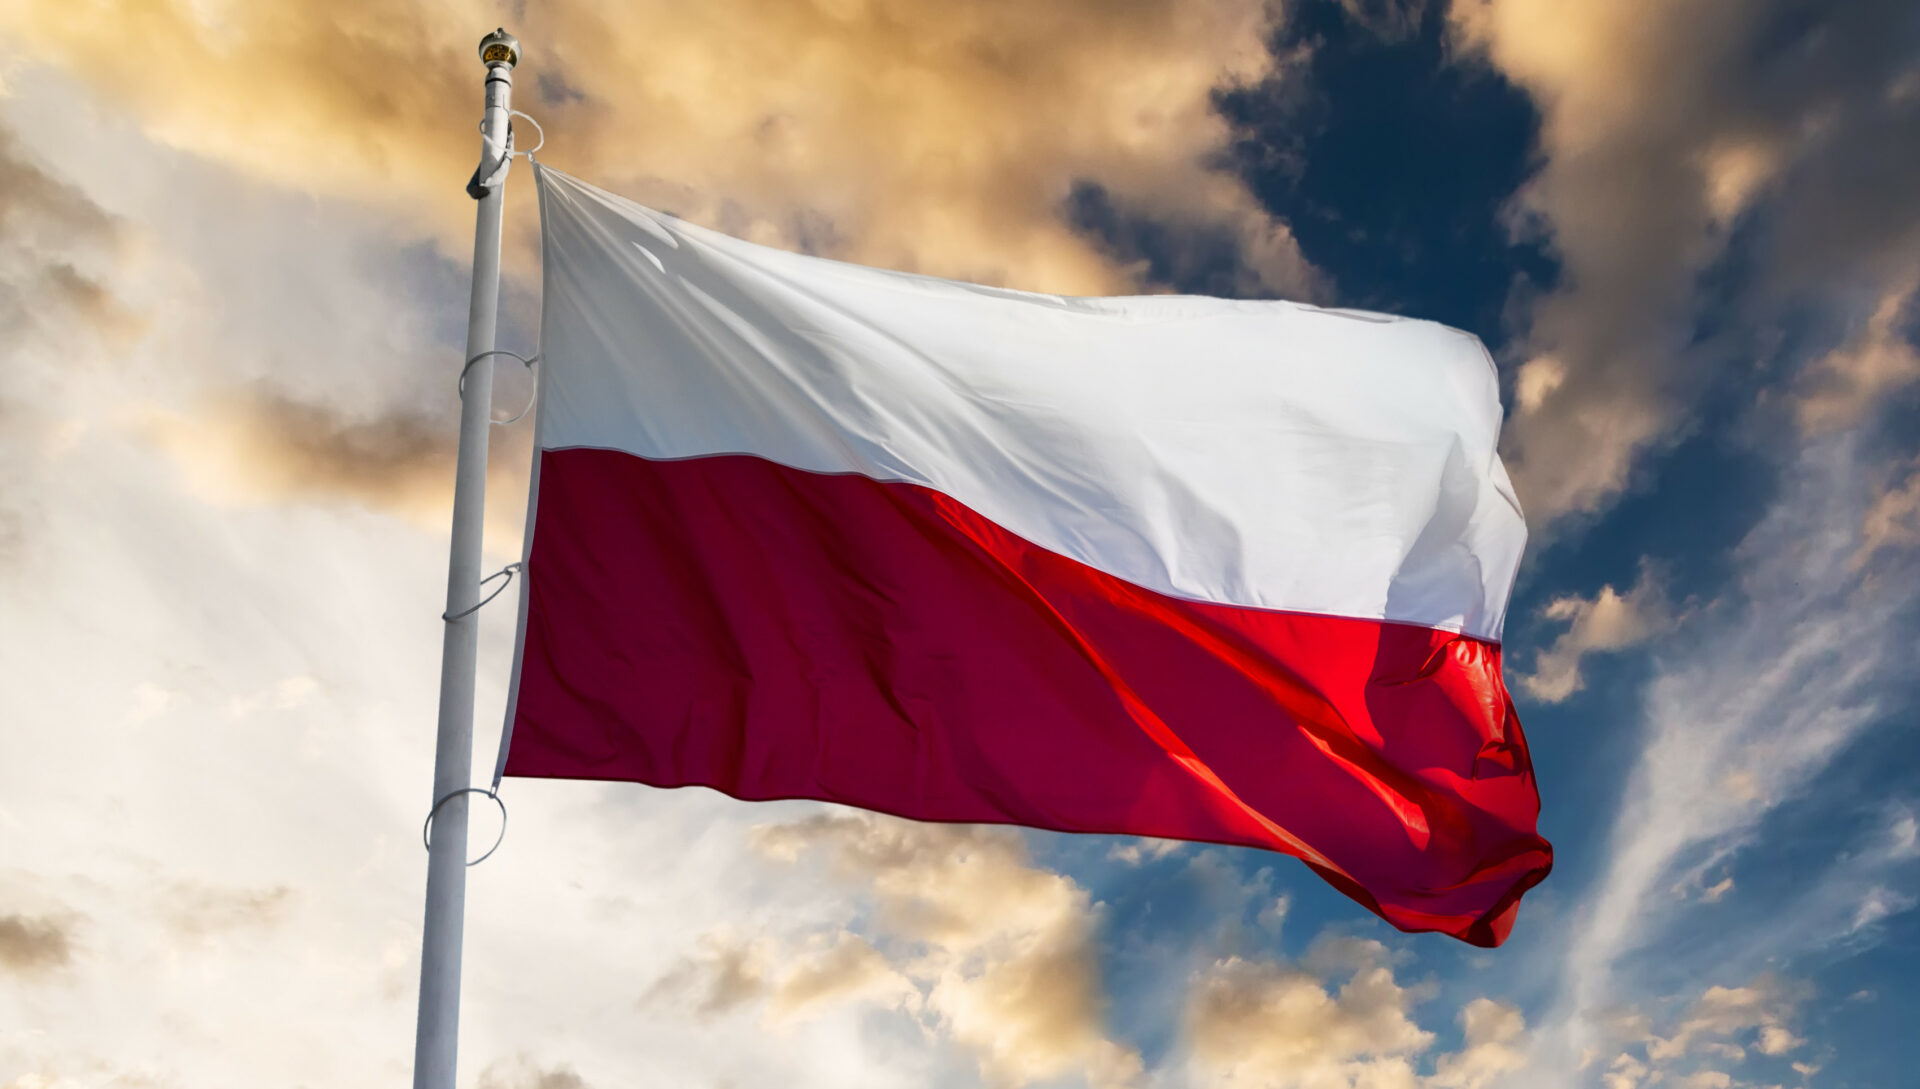 May 2nd - National Flag Day in Poland